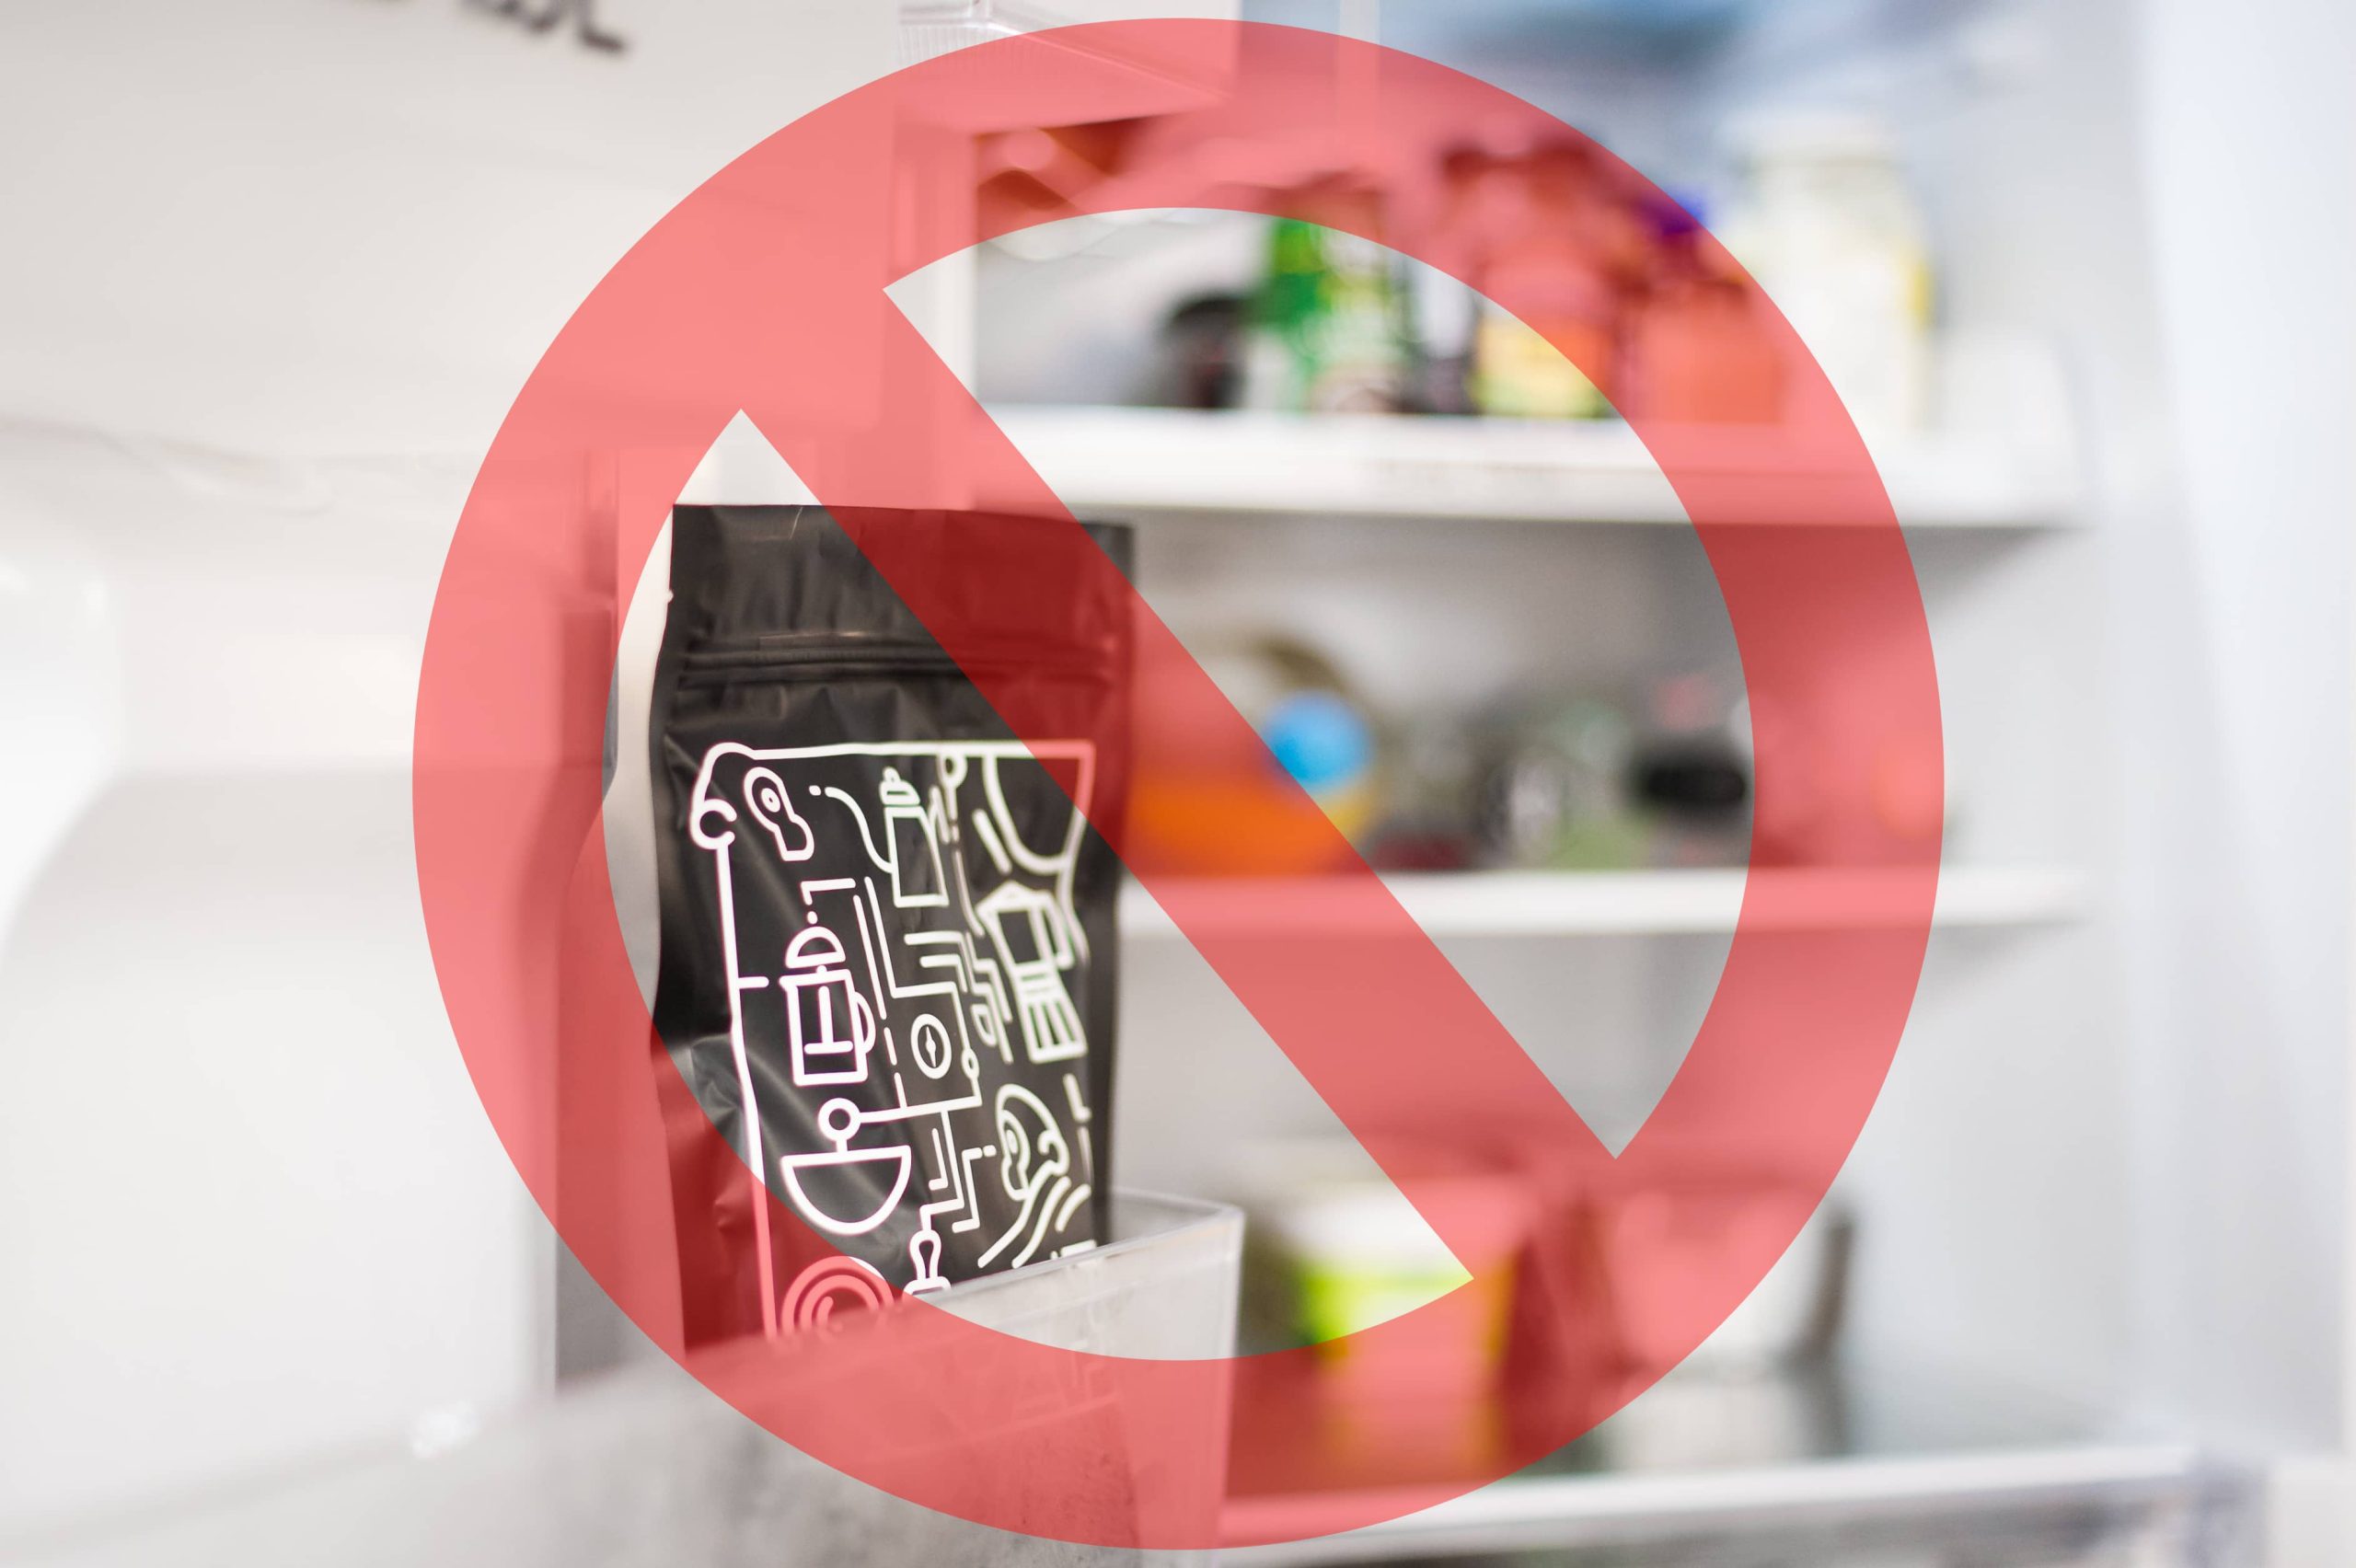 coffee bag in the fridge with a warning smbol